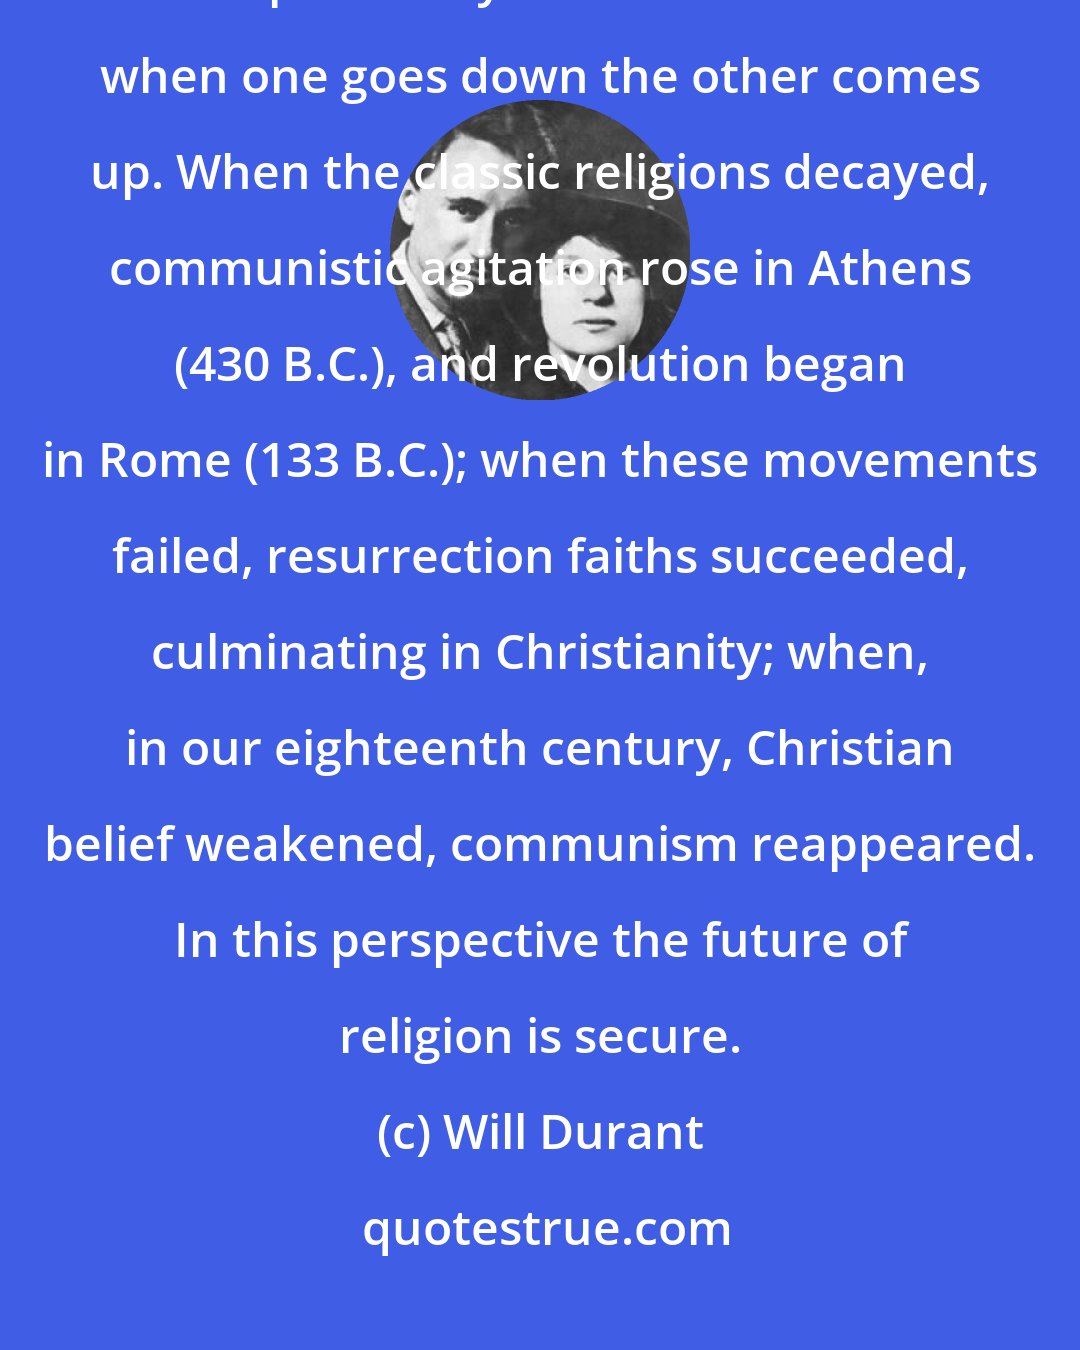 Will Durant: Historically the belief in heaven and the belief in utopia are like compensatory buckets in a well: when one goes down the other comes up. When the classic religions decayed, communistic agitation rose in Athens (430 B.C.), and revolution began in Rome (133 B.C.); when these movements failed, resurrection faiths succeeded, culminating in Christianity; when, in our eighteenth century, Christian belief weakened, communism reappeared. In this perspective the future of religion is secure.